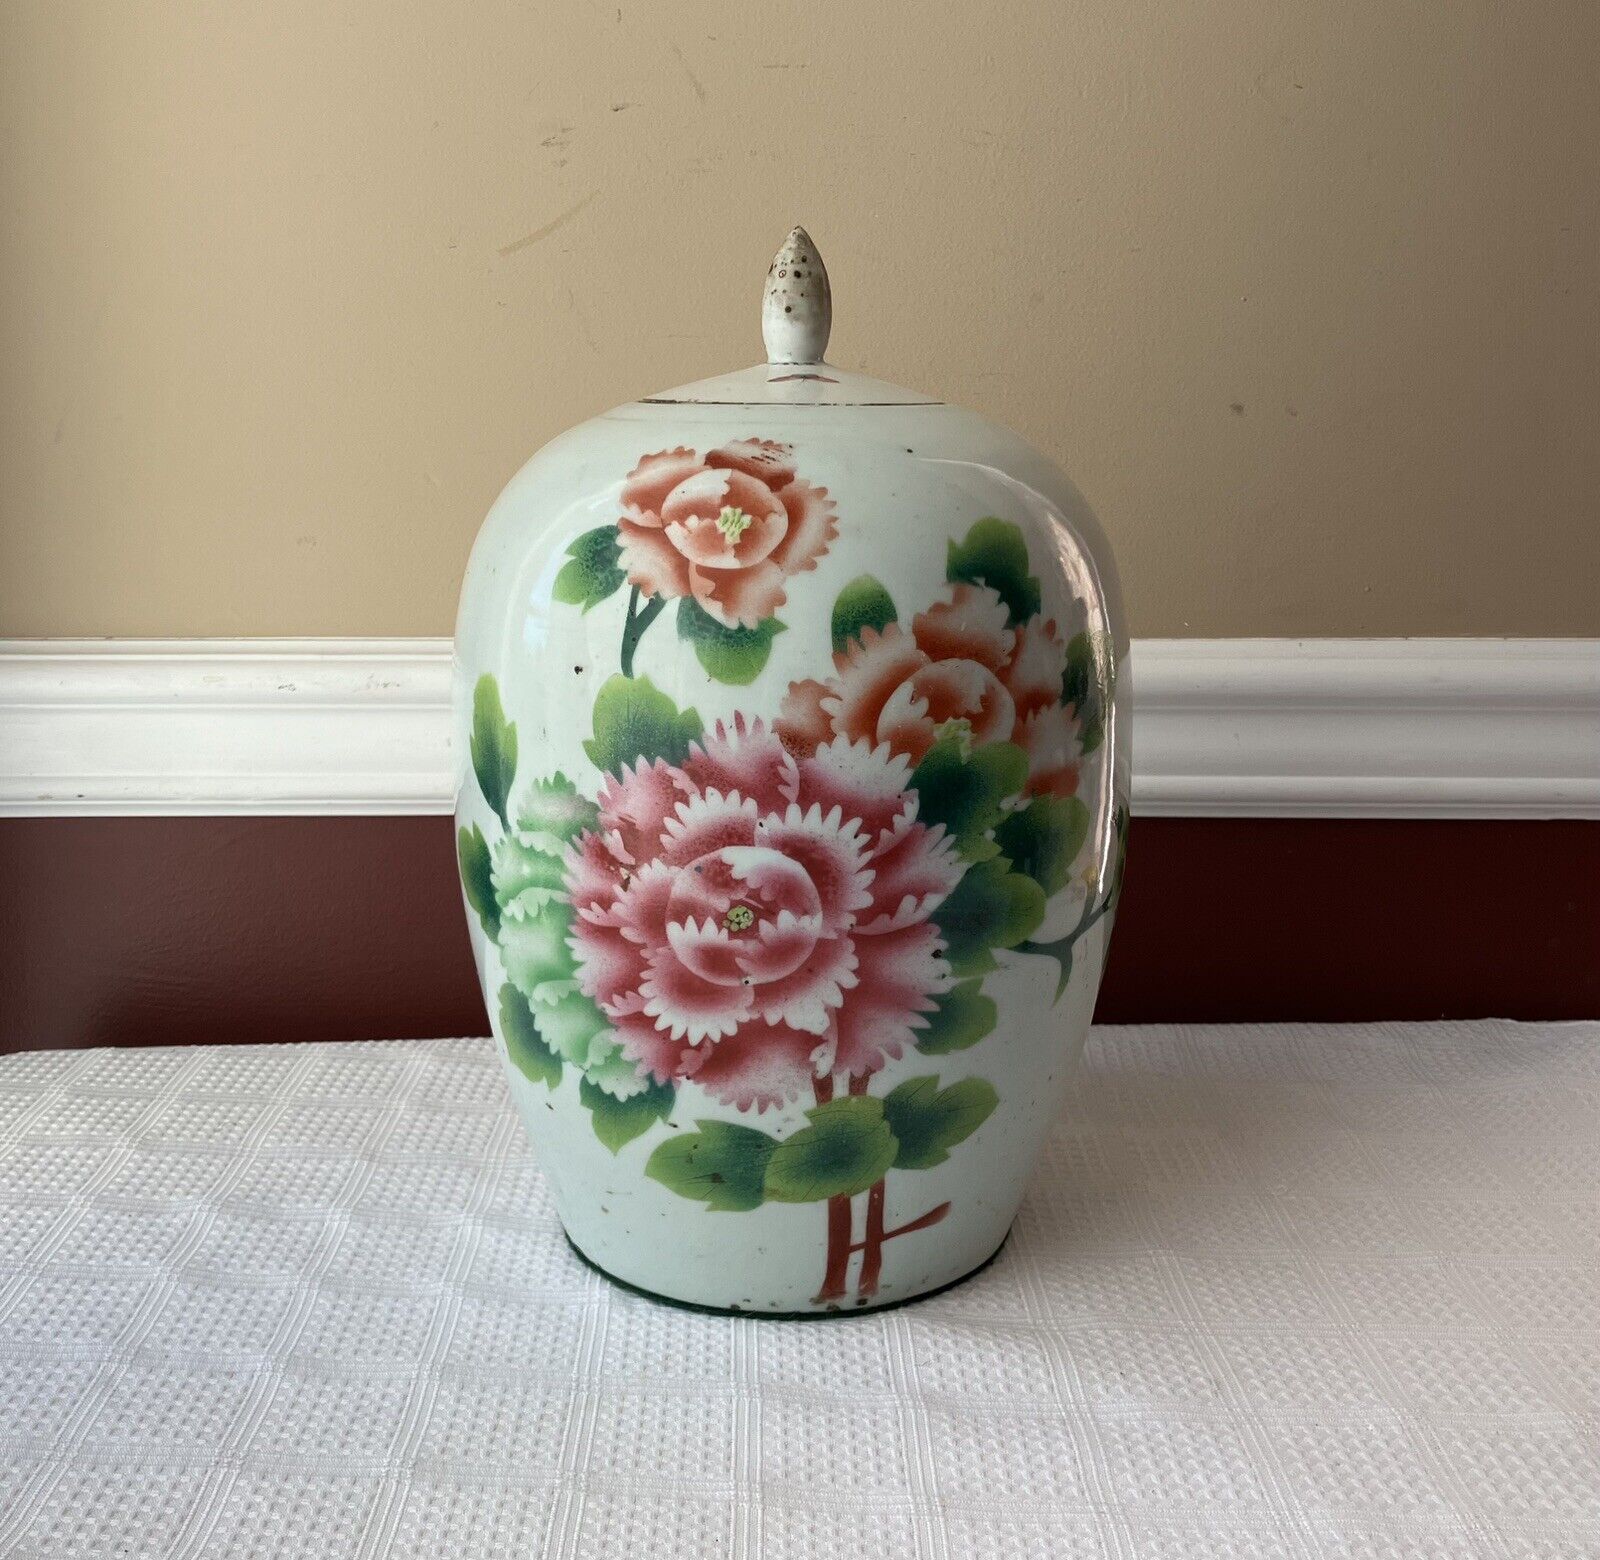 Large Antique Chinese Porcelain Inscribed Floral Covered Jar, 12.25” T x 7.5” W